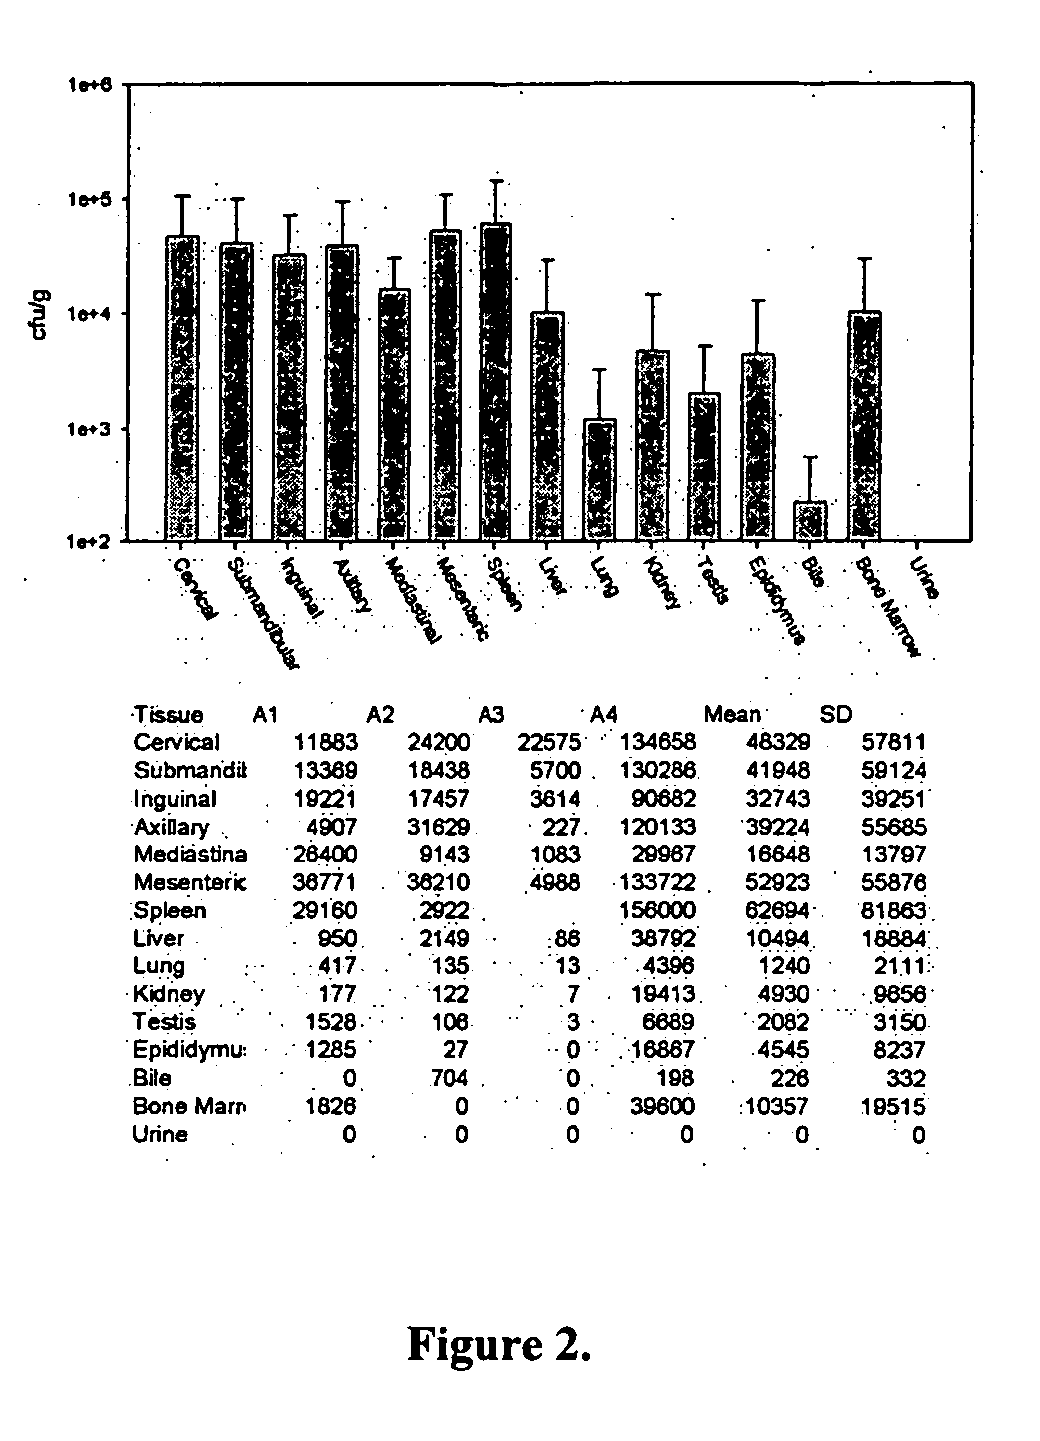 Mutant strains of Brucella melitensis and immunogenic compositions